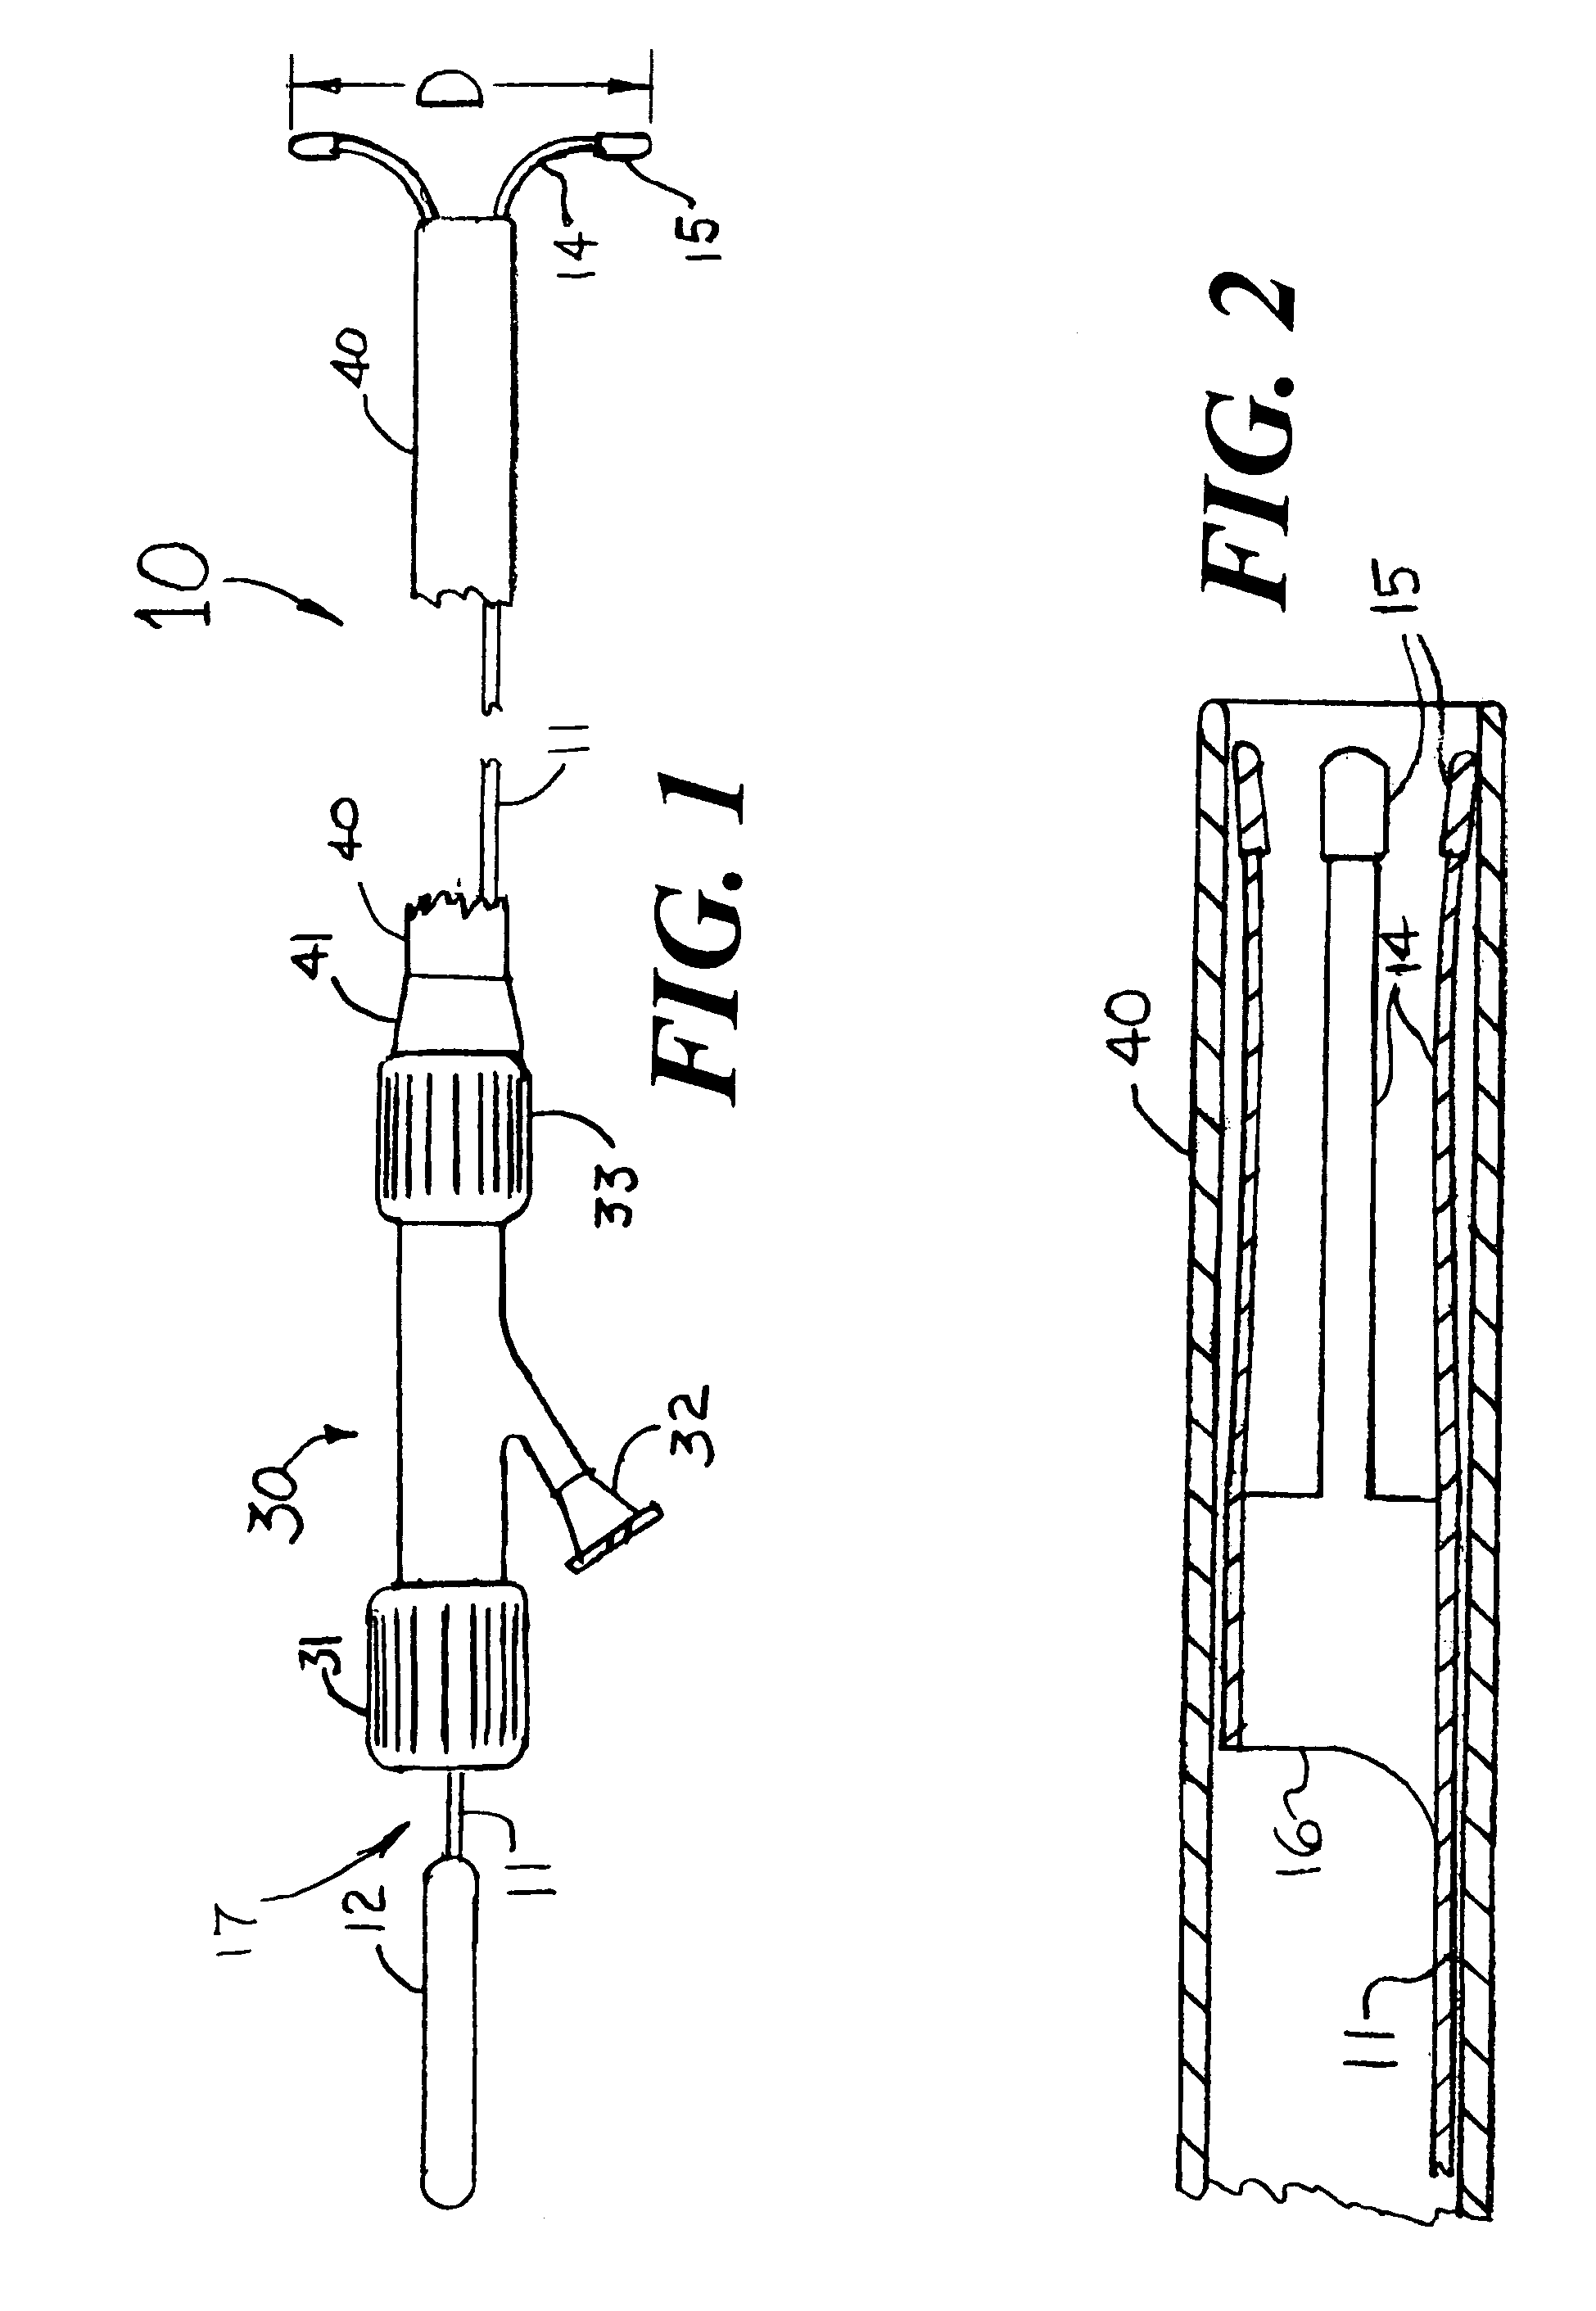 Means and method for the accurate placement of a stent at the ostium of an artery